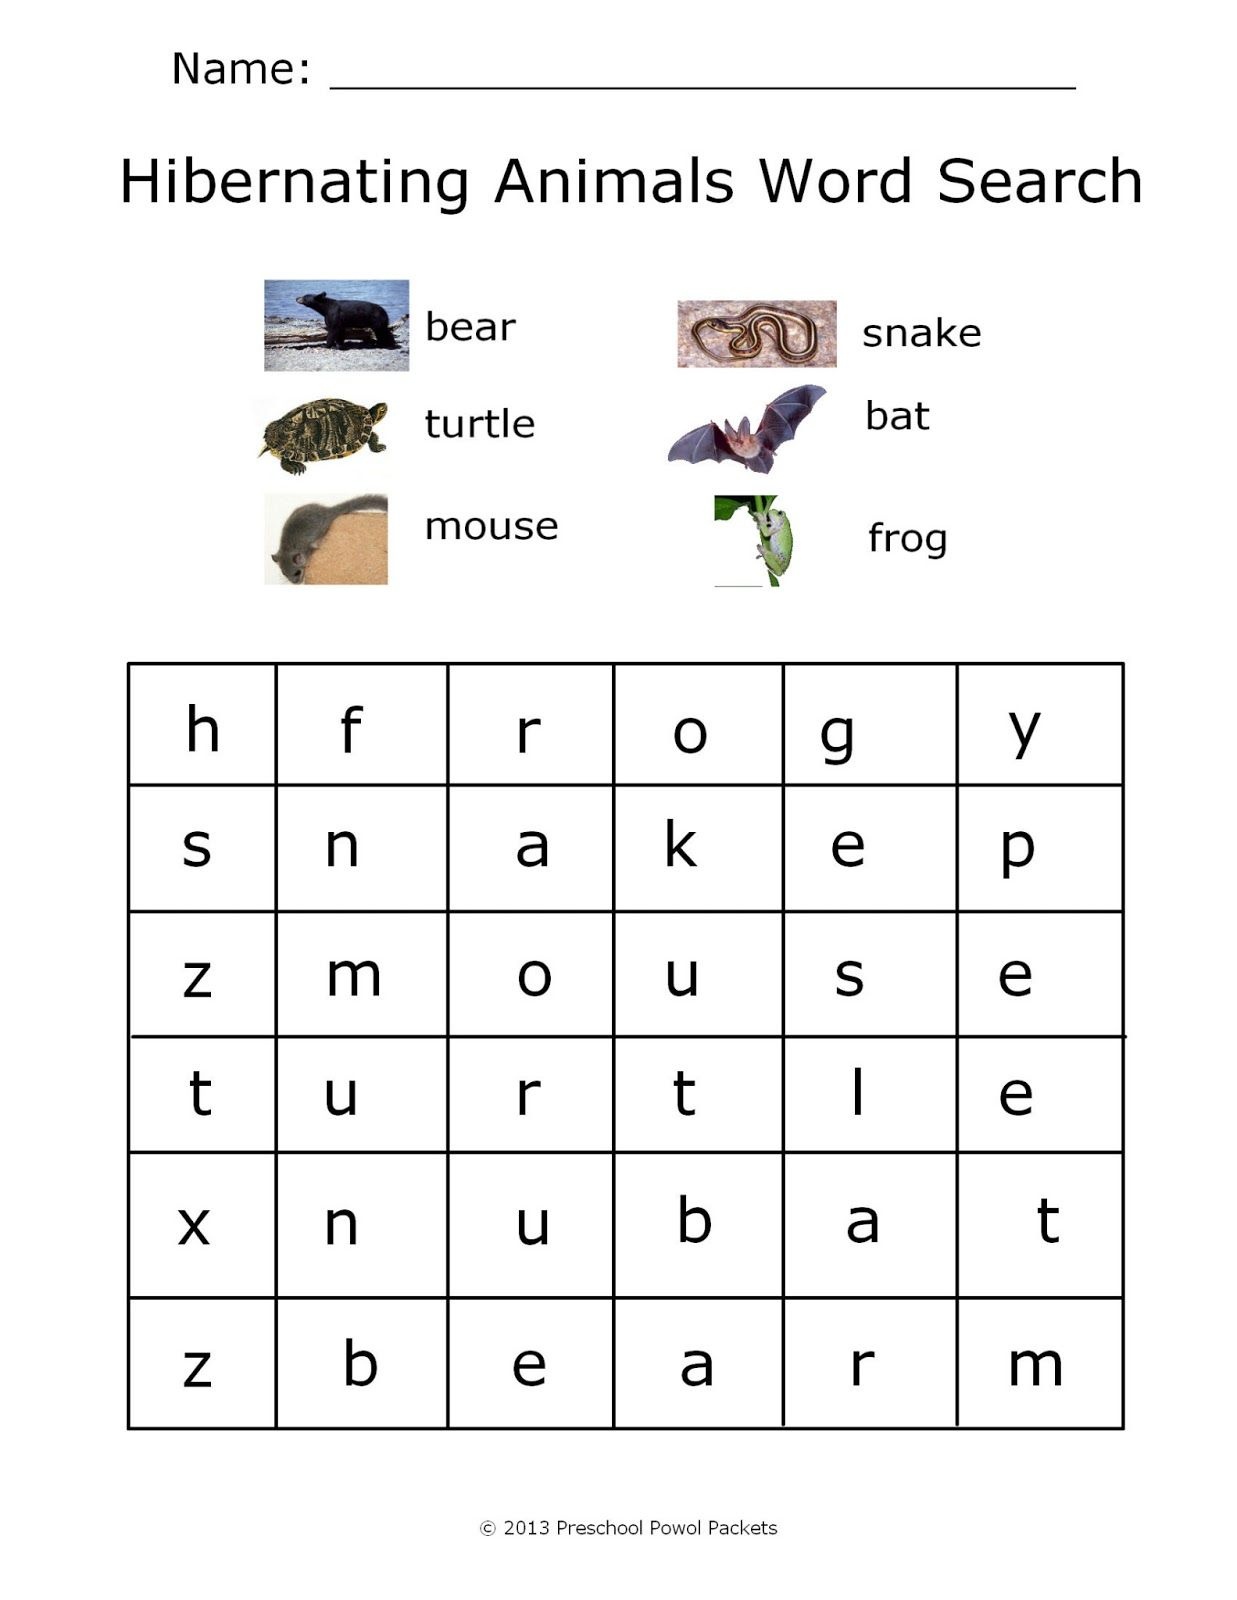 Animal search. Word search animals. Animal Wordsearch. Animals Wordsearch for Kindergarten. Animals Wordsearch for Kids.